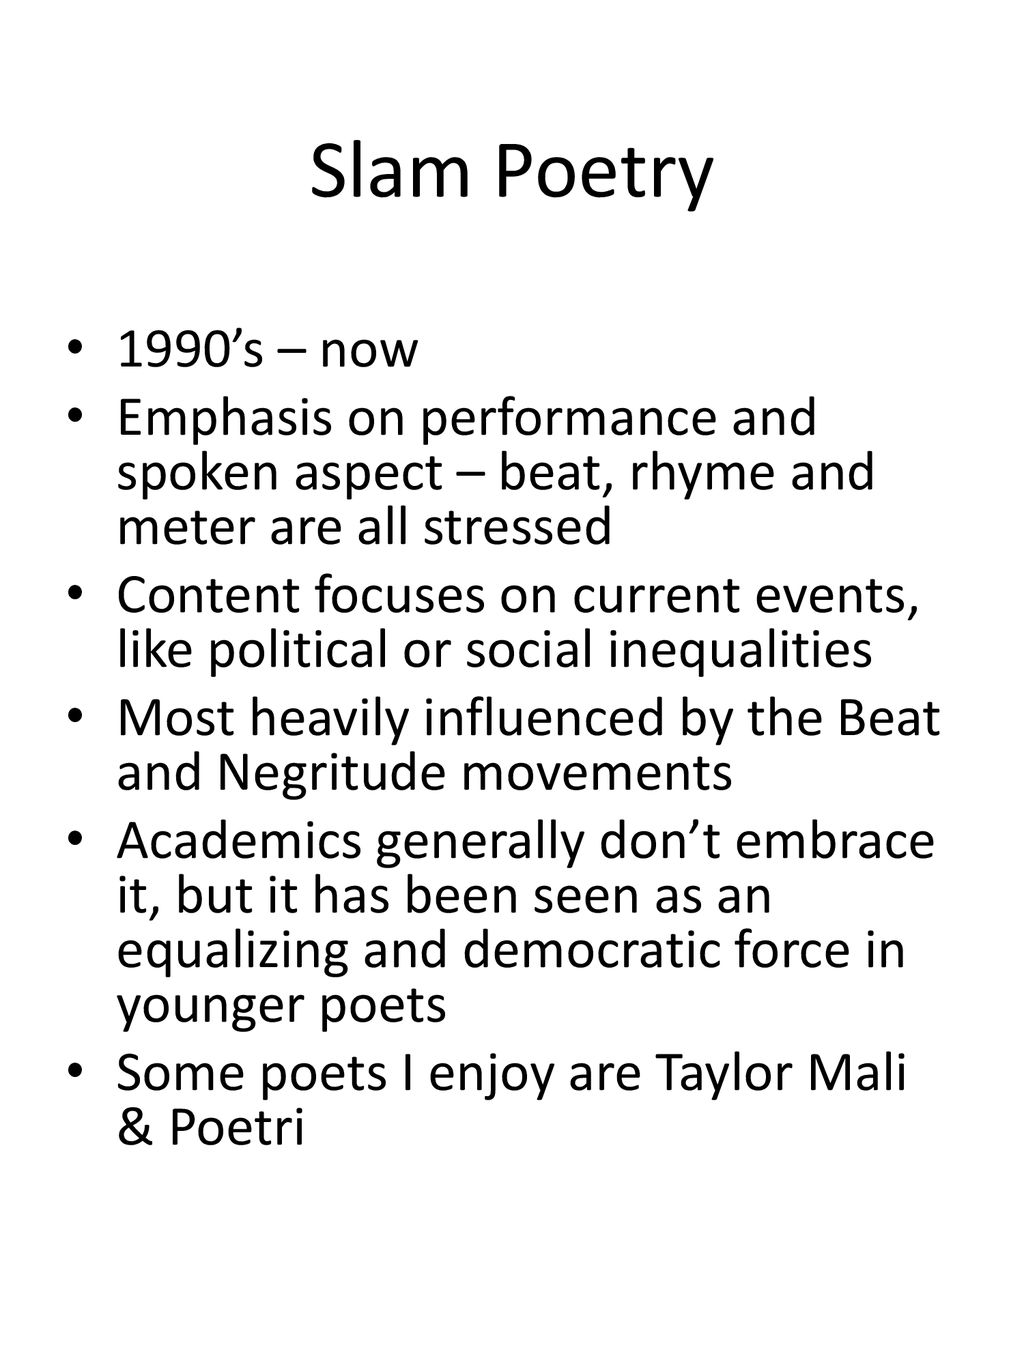 A History of English Poetry - ppt download